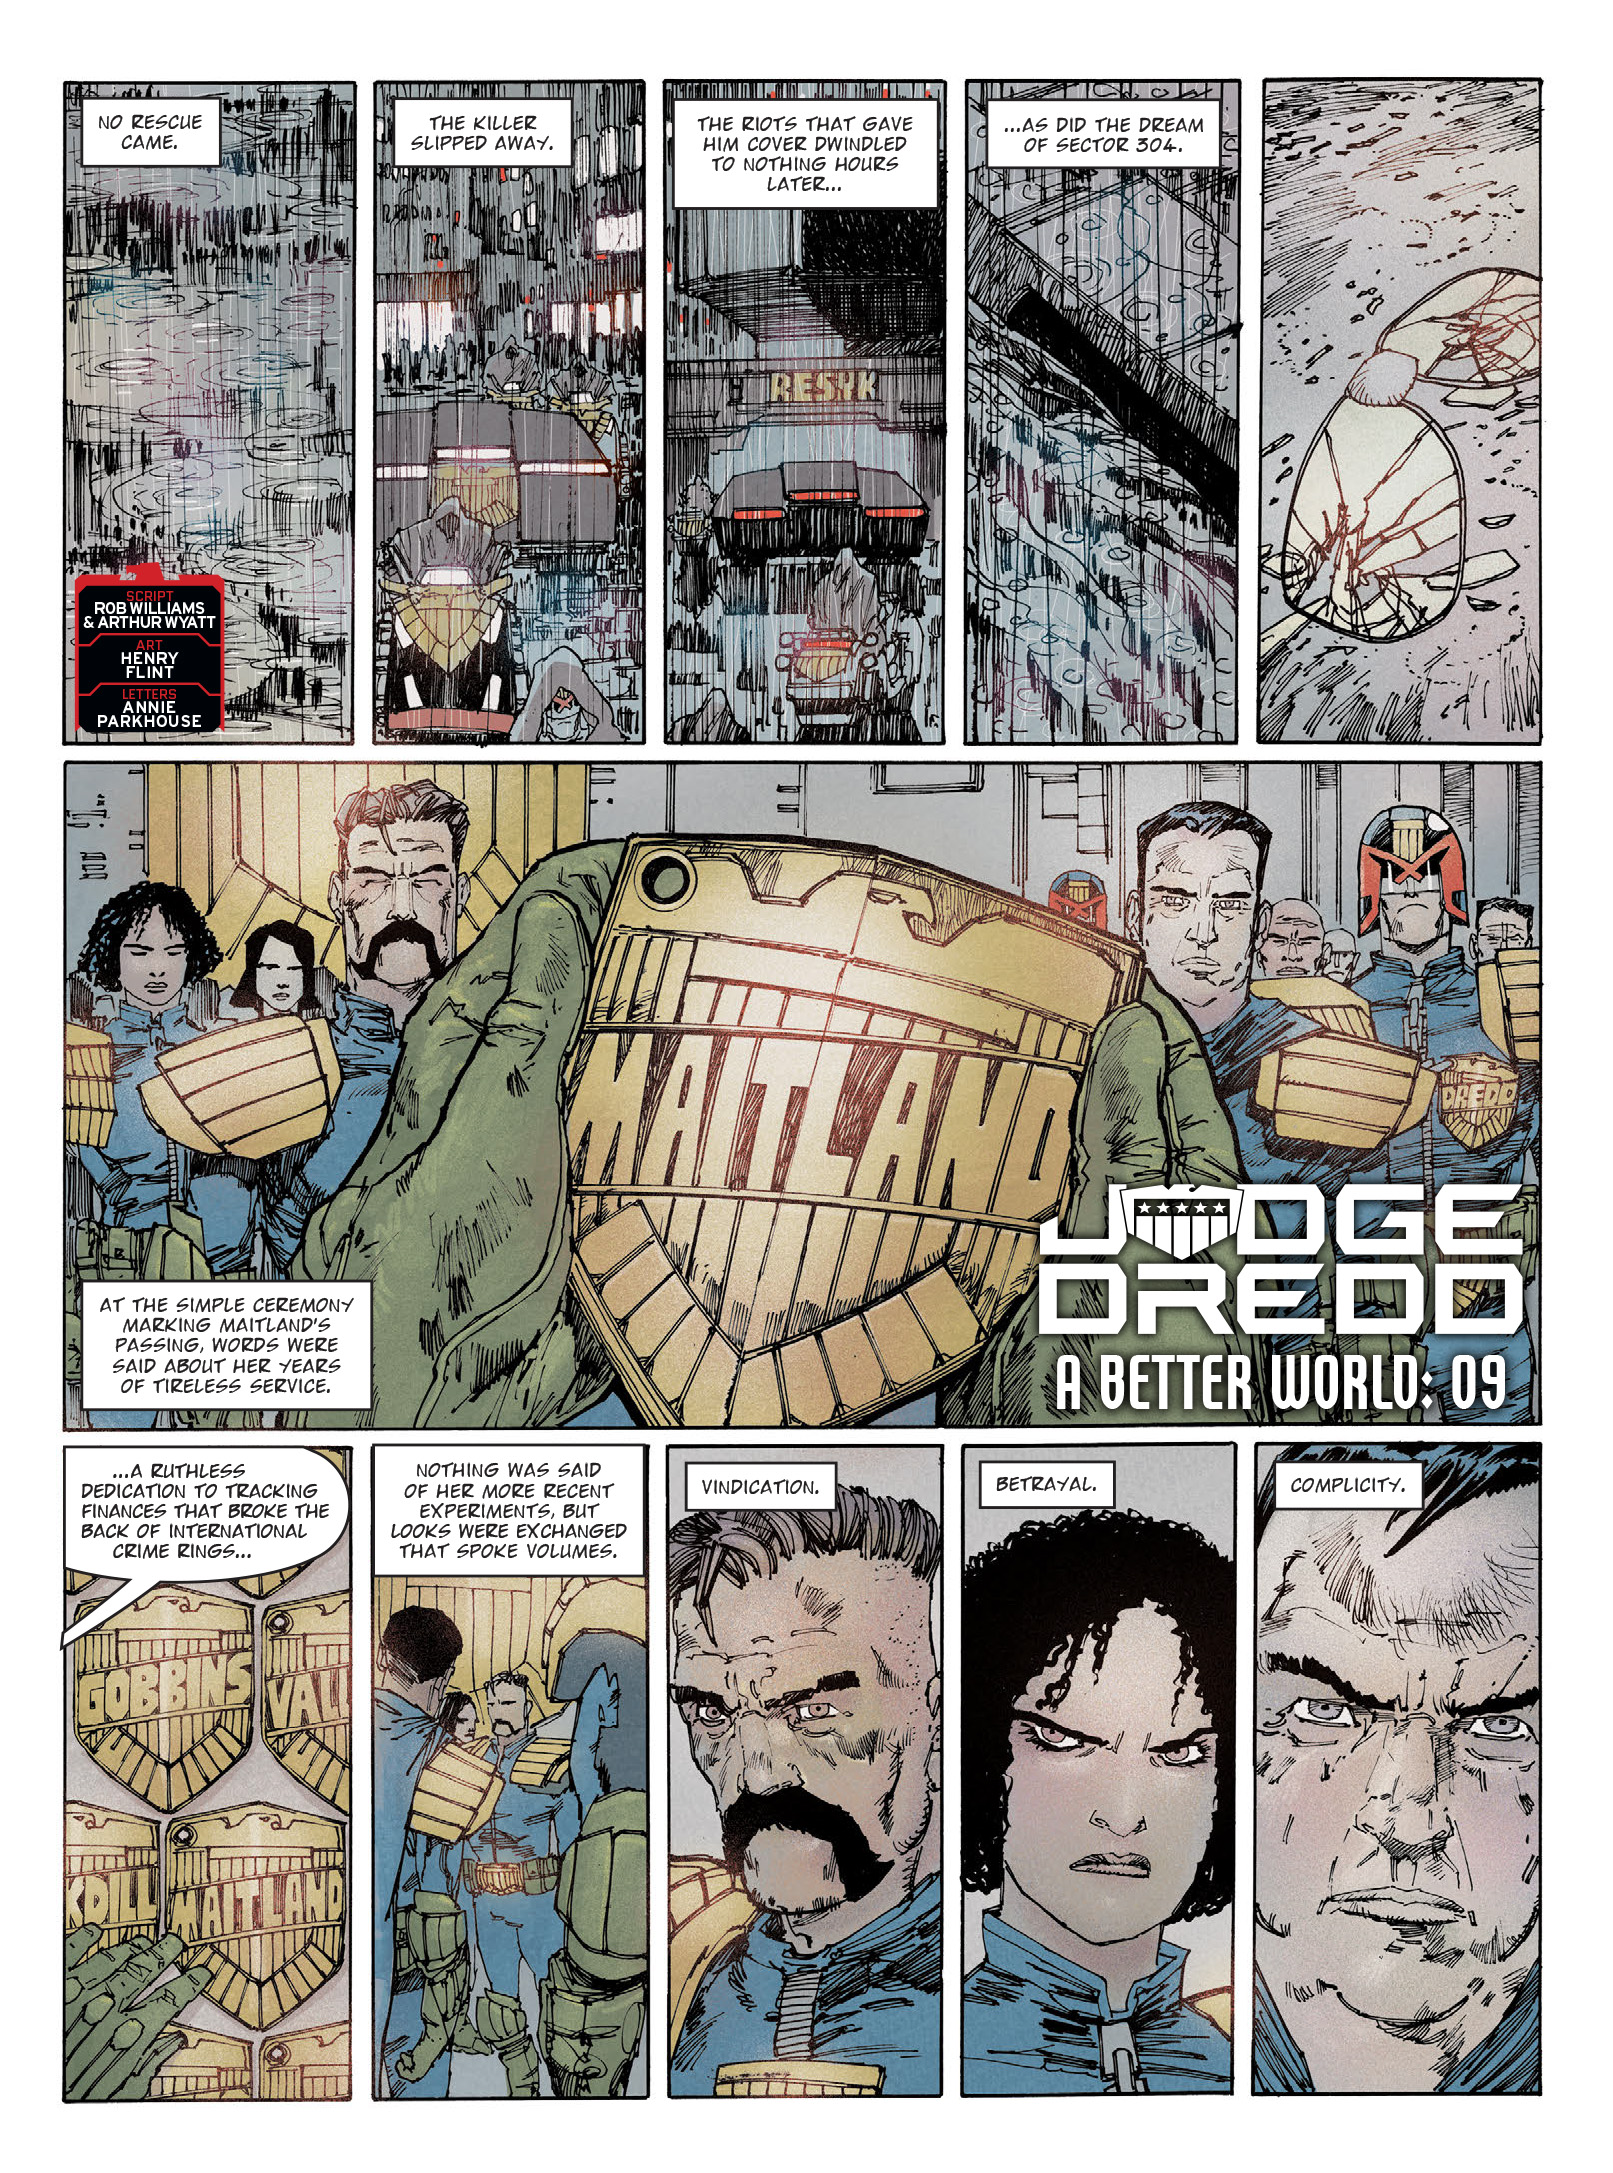 2000 AD: Chapter 2372 - Page 3